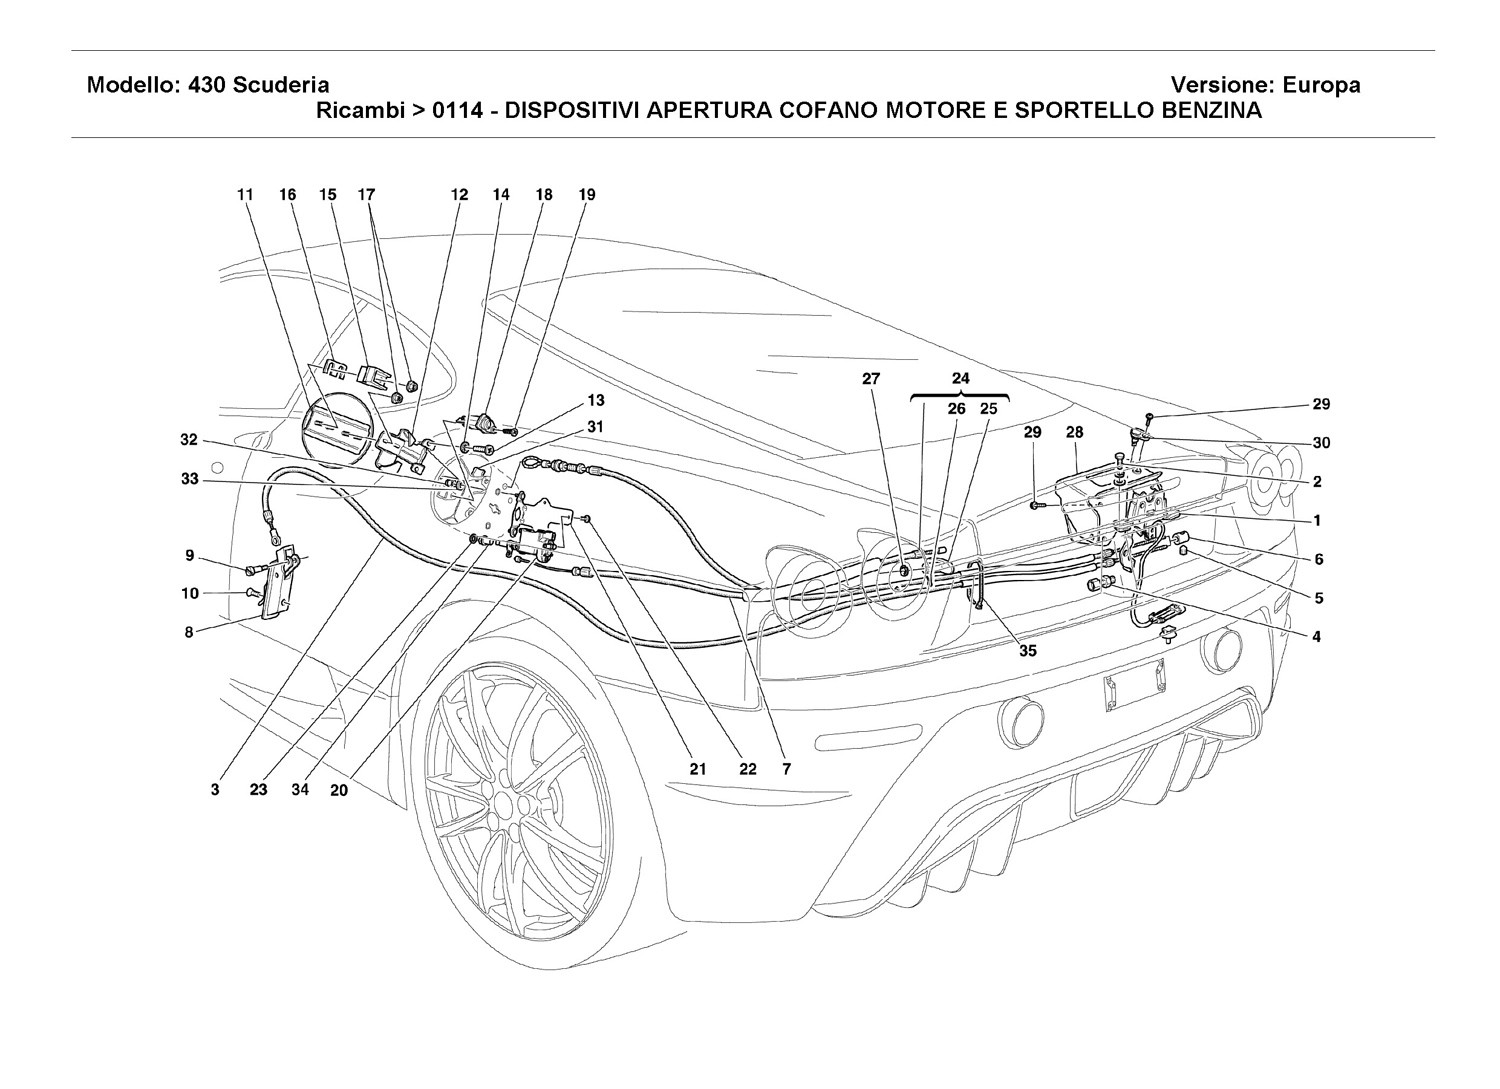 OPENING DEVICES FOR ENGINE BONNET AND GAS DOOR